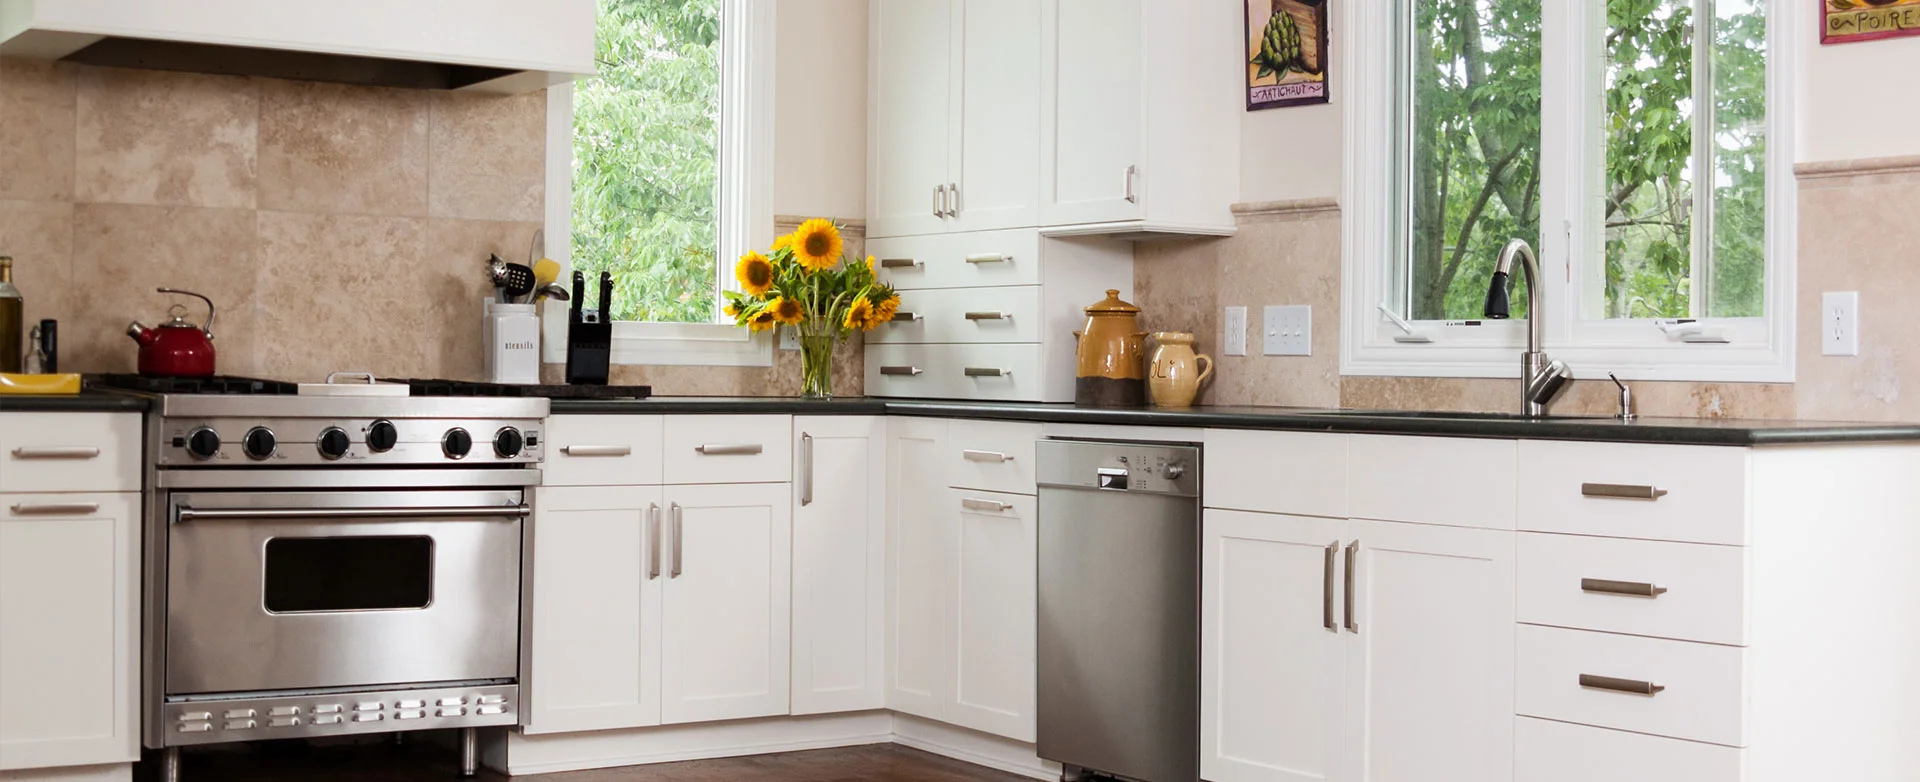 Get Enchanted By the Magic of Kings Interior Design's Kitchen Remodeling Services